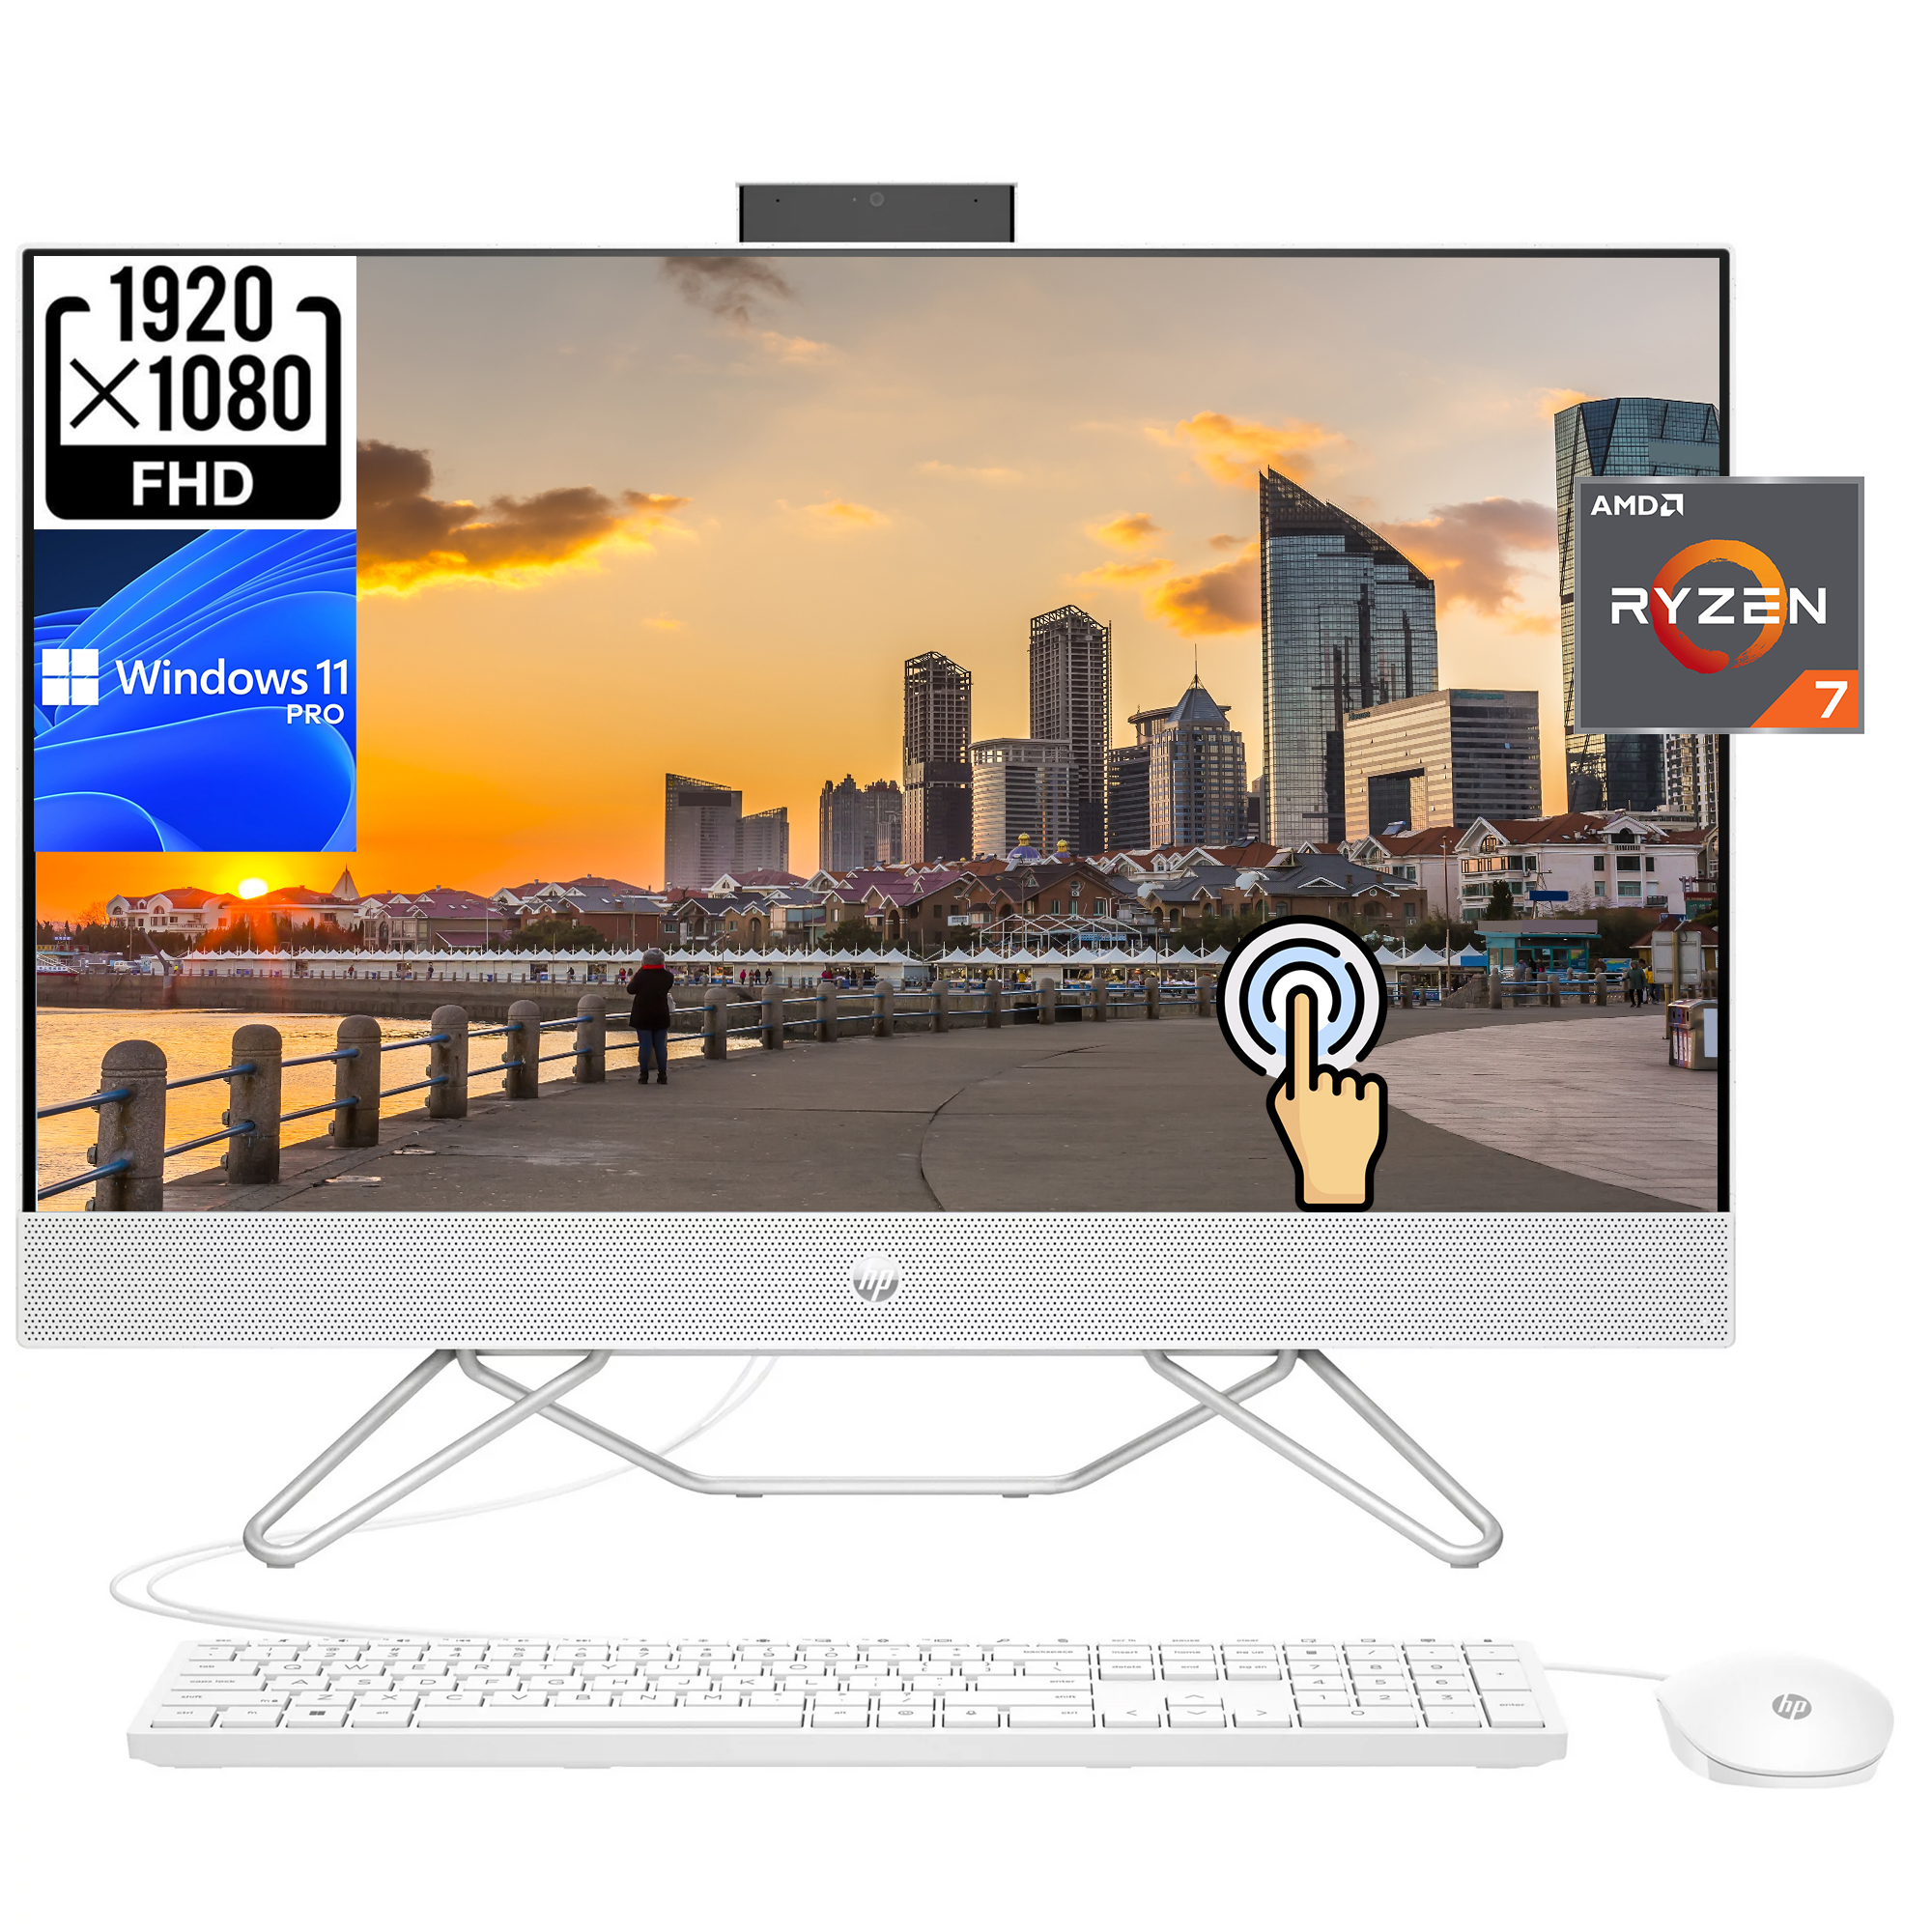 HP 27" FHD Touchscreen All-in-One [Windows 11 Pro] Business Desktop Computer PC, 8-Core AMD Ryzen 7 5700U(up to 4.3 GHz), 32GB RAM, 2TB PCIe SSD, Wi-Fi, Bluetooth, Wired Keyboard & Mouse - image 1 of 6